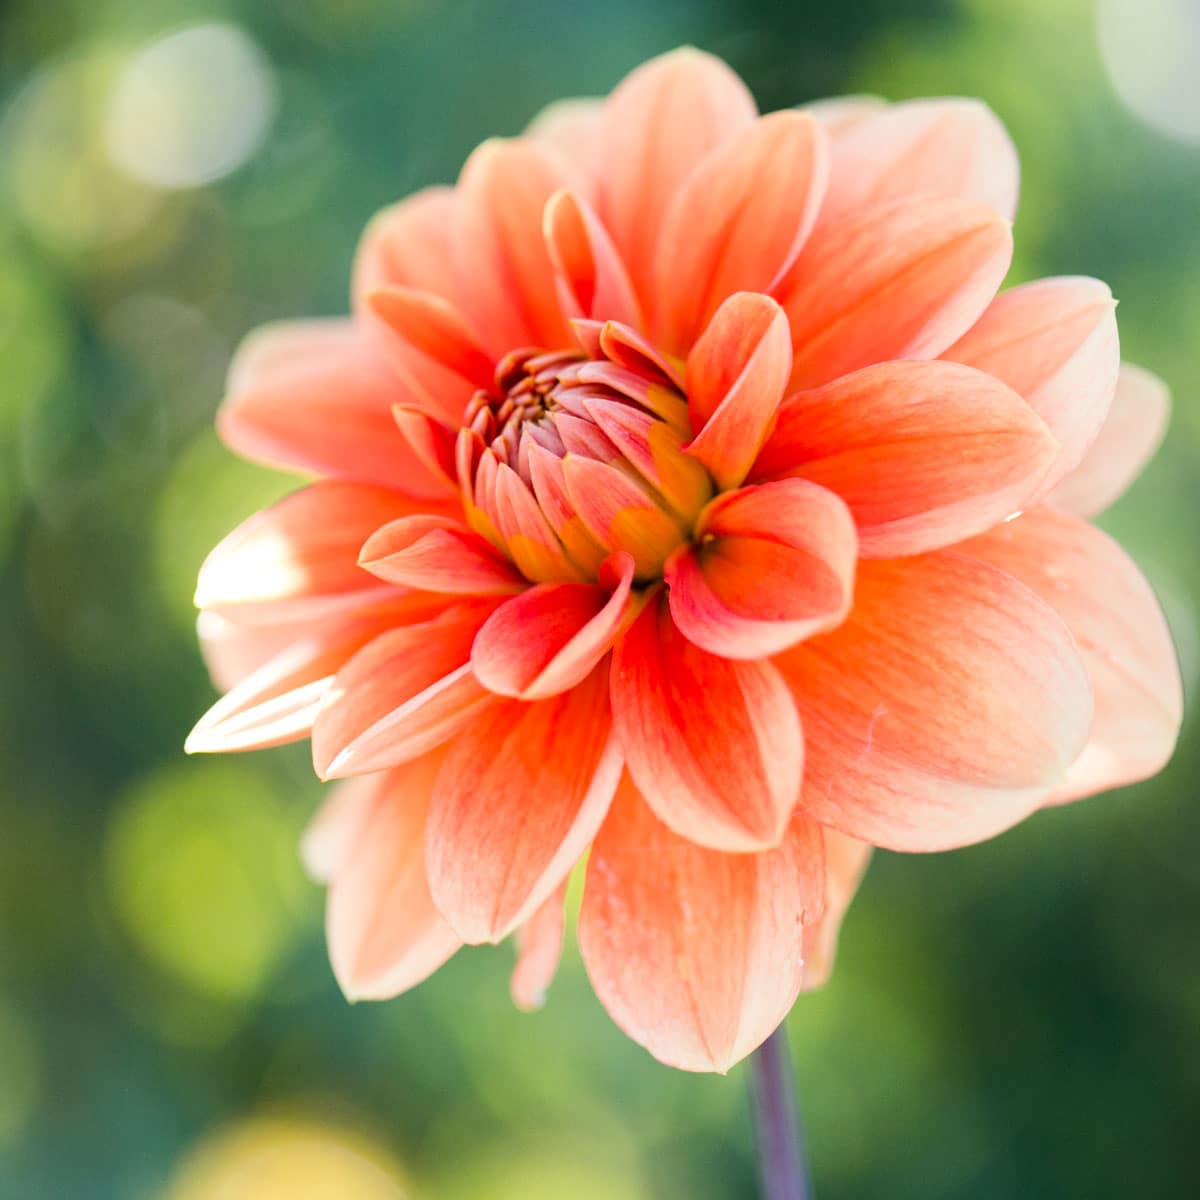 How To Grow And Care For Dahlia Flowers